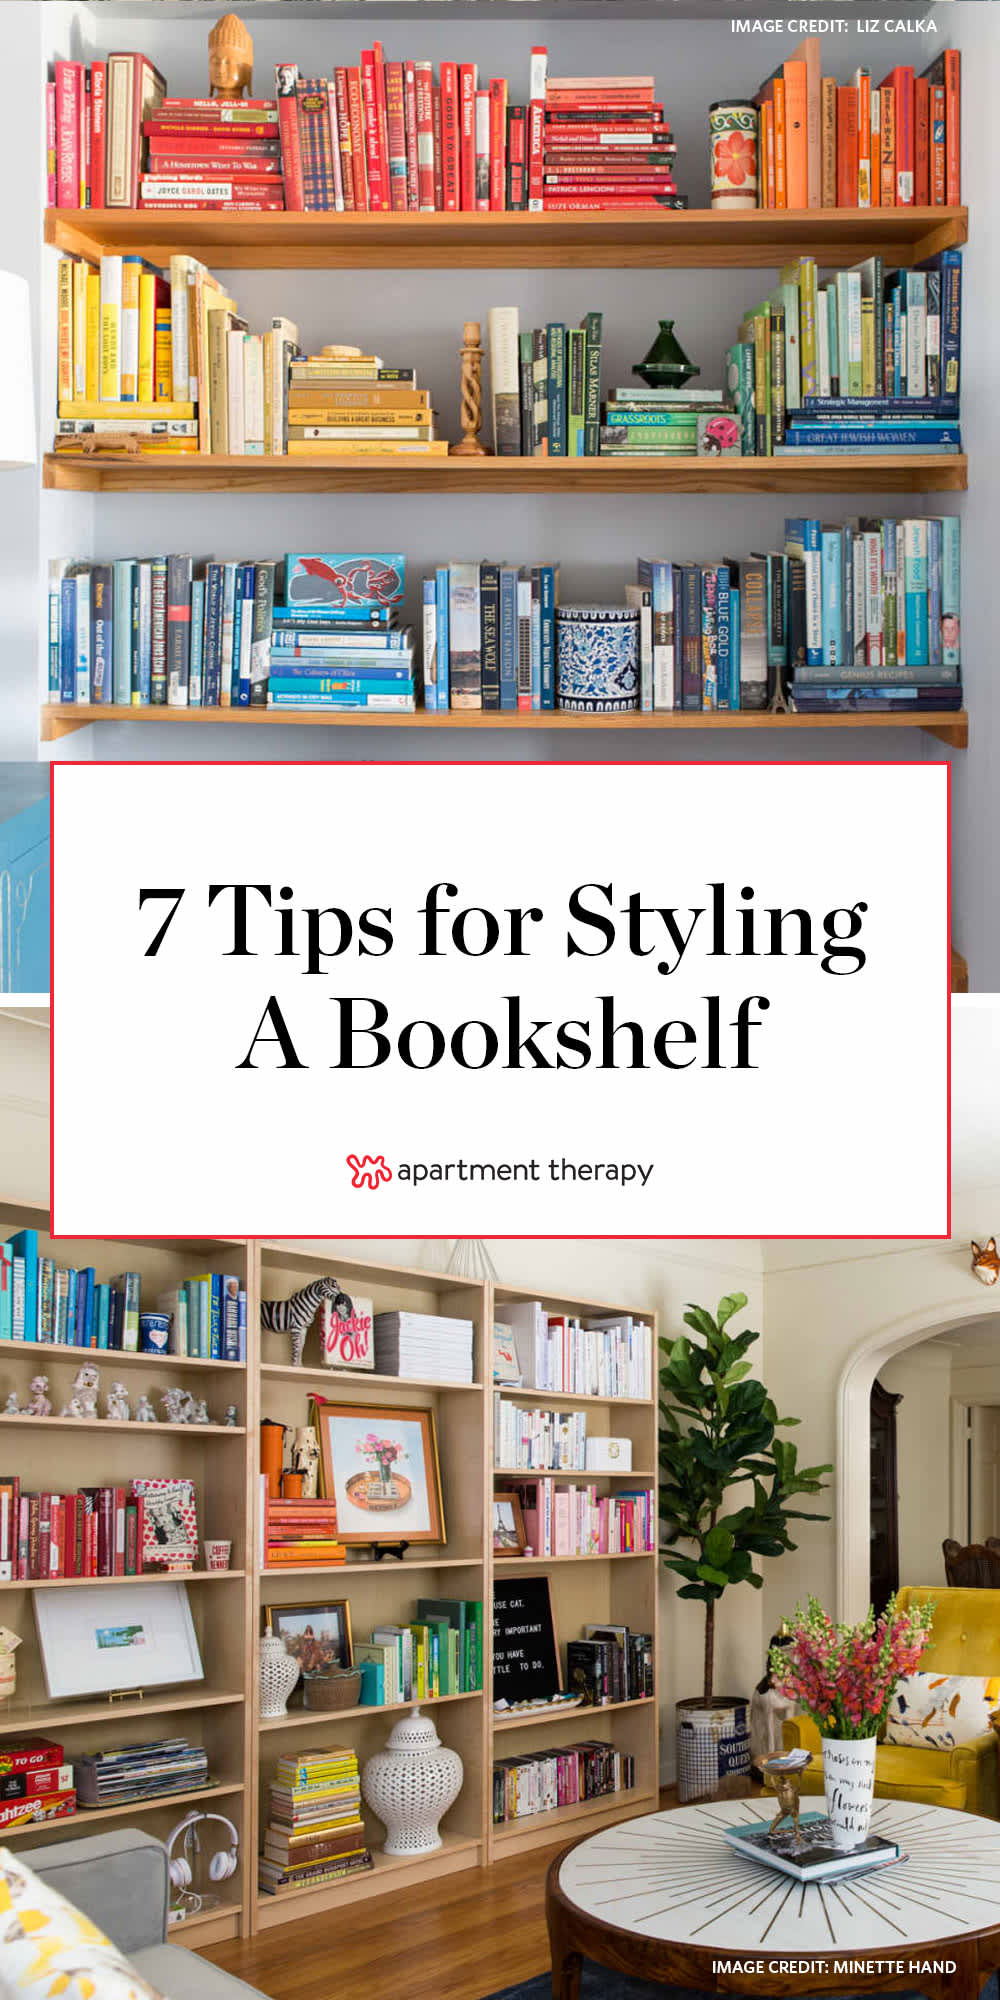 How To Style A Bookshelf Home Staging Tips Apartment Therapy,Furniture Arrangement Ideas